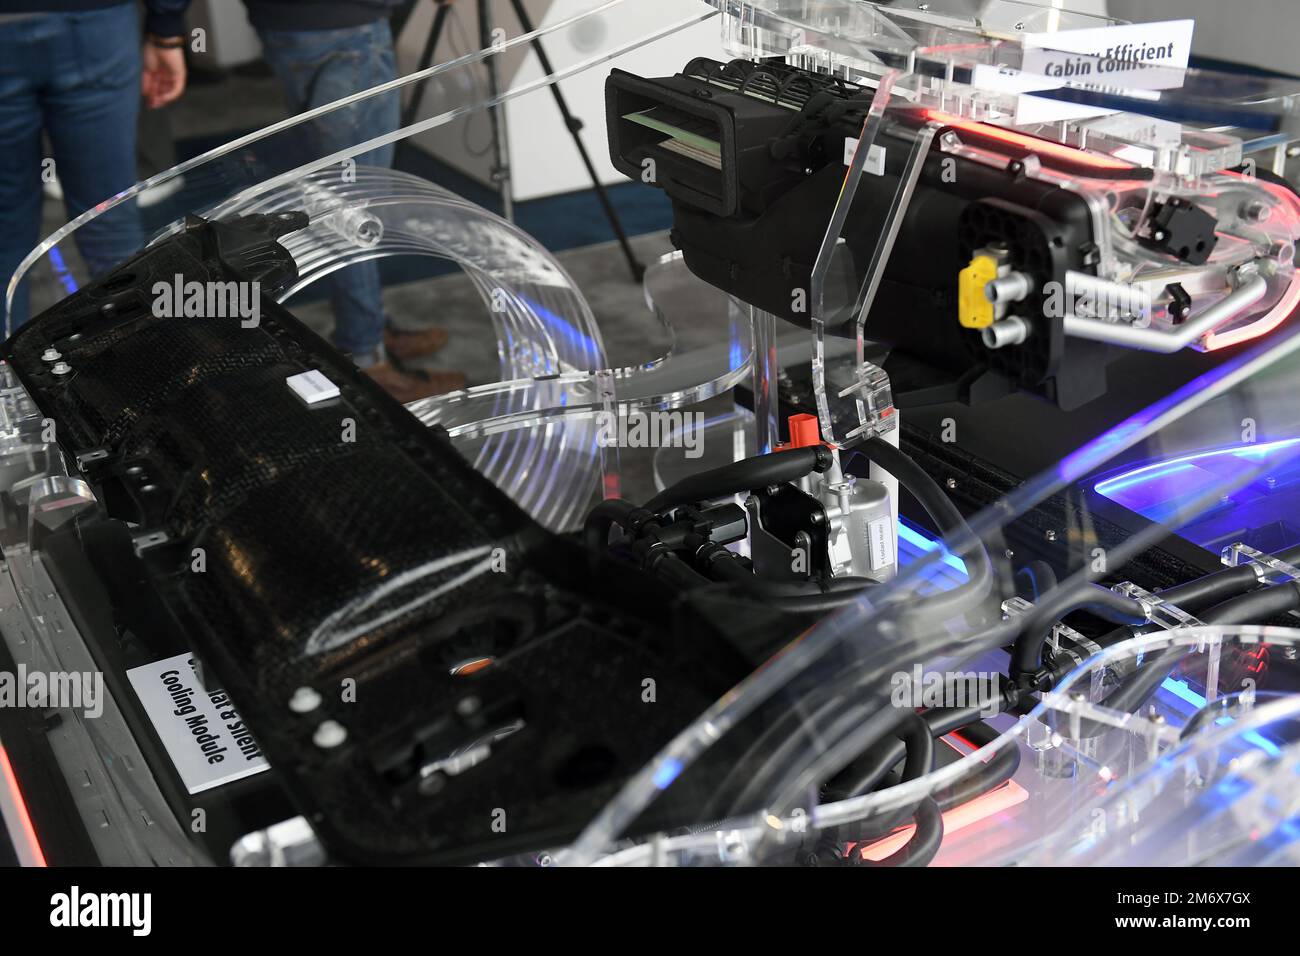 Las Vegas, USA. 05th Jan, 2023. Valeo electric car components and accessories are displayed during CES 2023 at the Las Vegas Convention Center in Las Vegas, NV on January 5, 2023. (Photo by Bryan Steffy/Sipa USA) Credit: Sipa USA/Alamy Live News Stock Photo